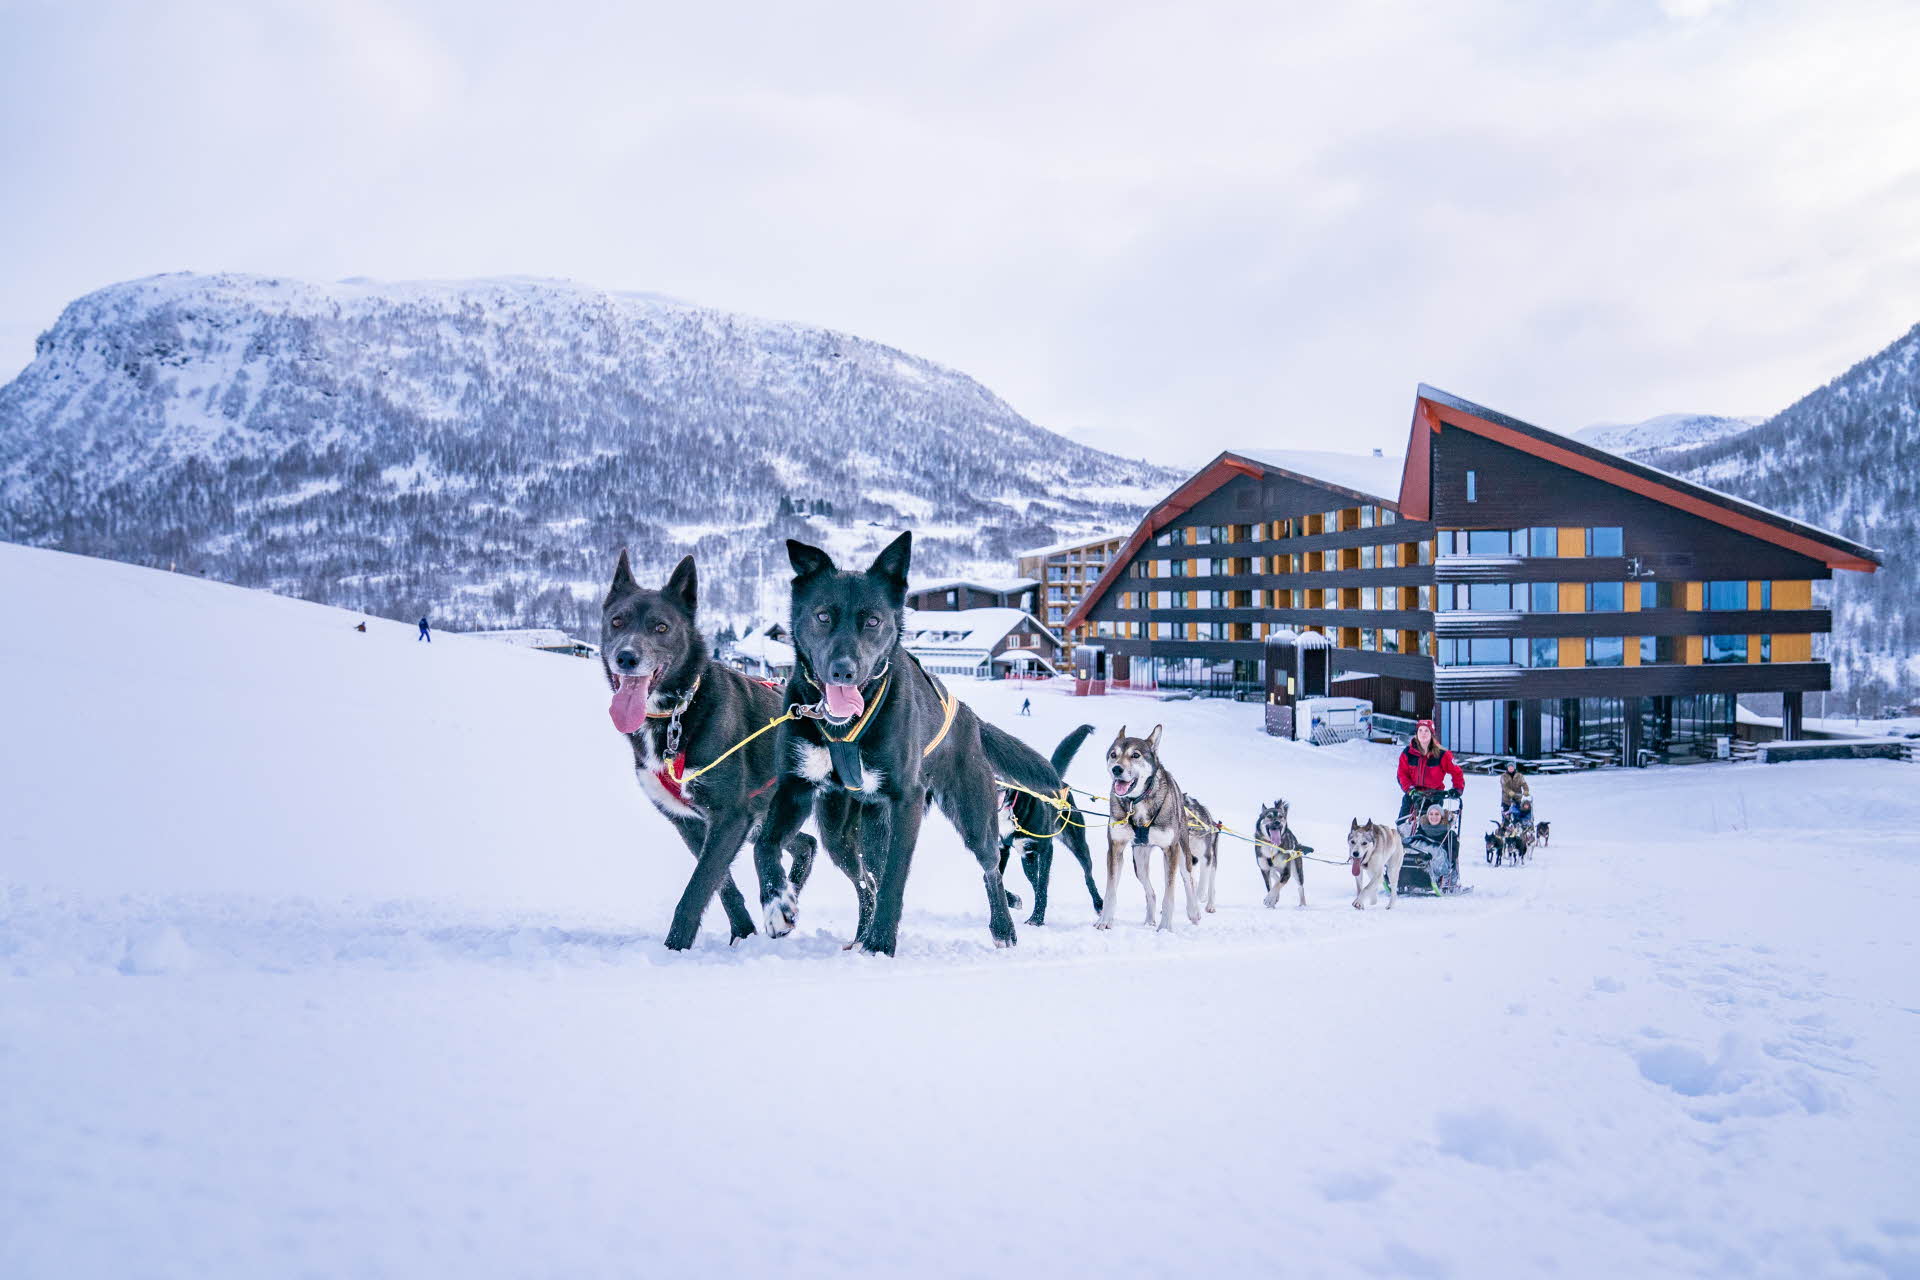 Sled dogs running up the slope from Myrkdalen Hotel in the winter